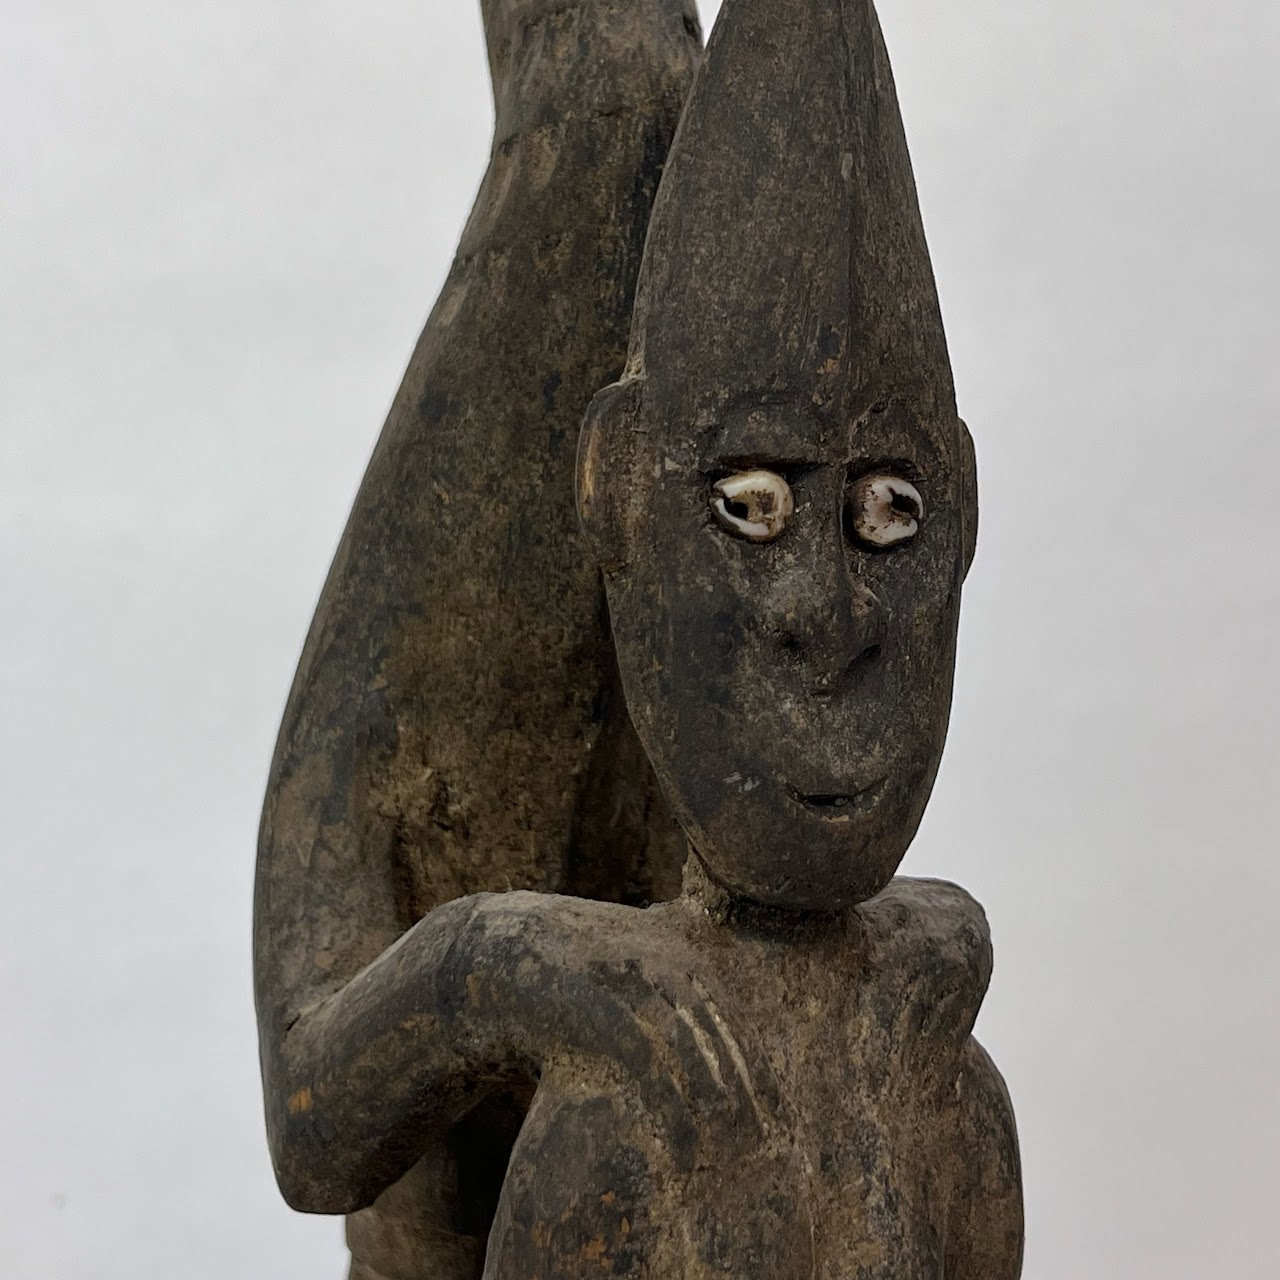 Papua New Guinean Sepik River Figure with Ancestral Bird Carving